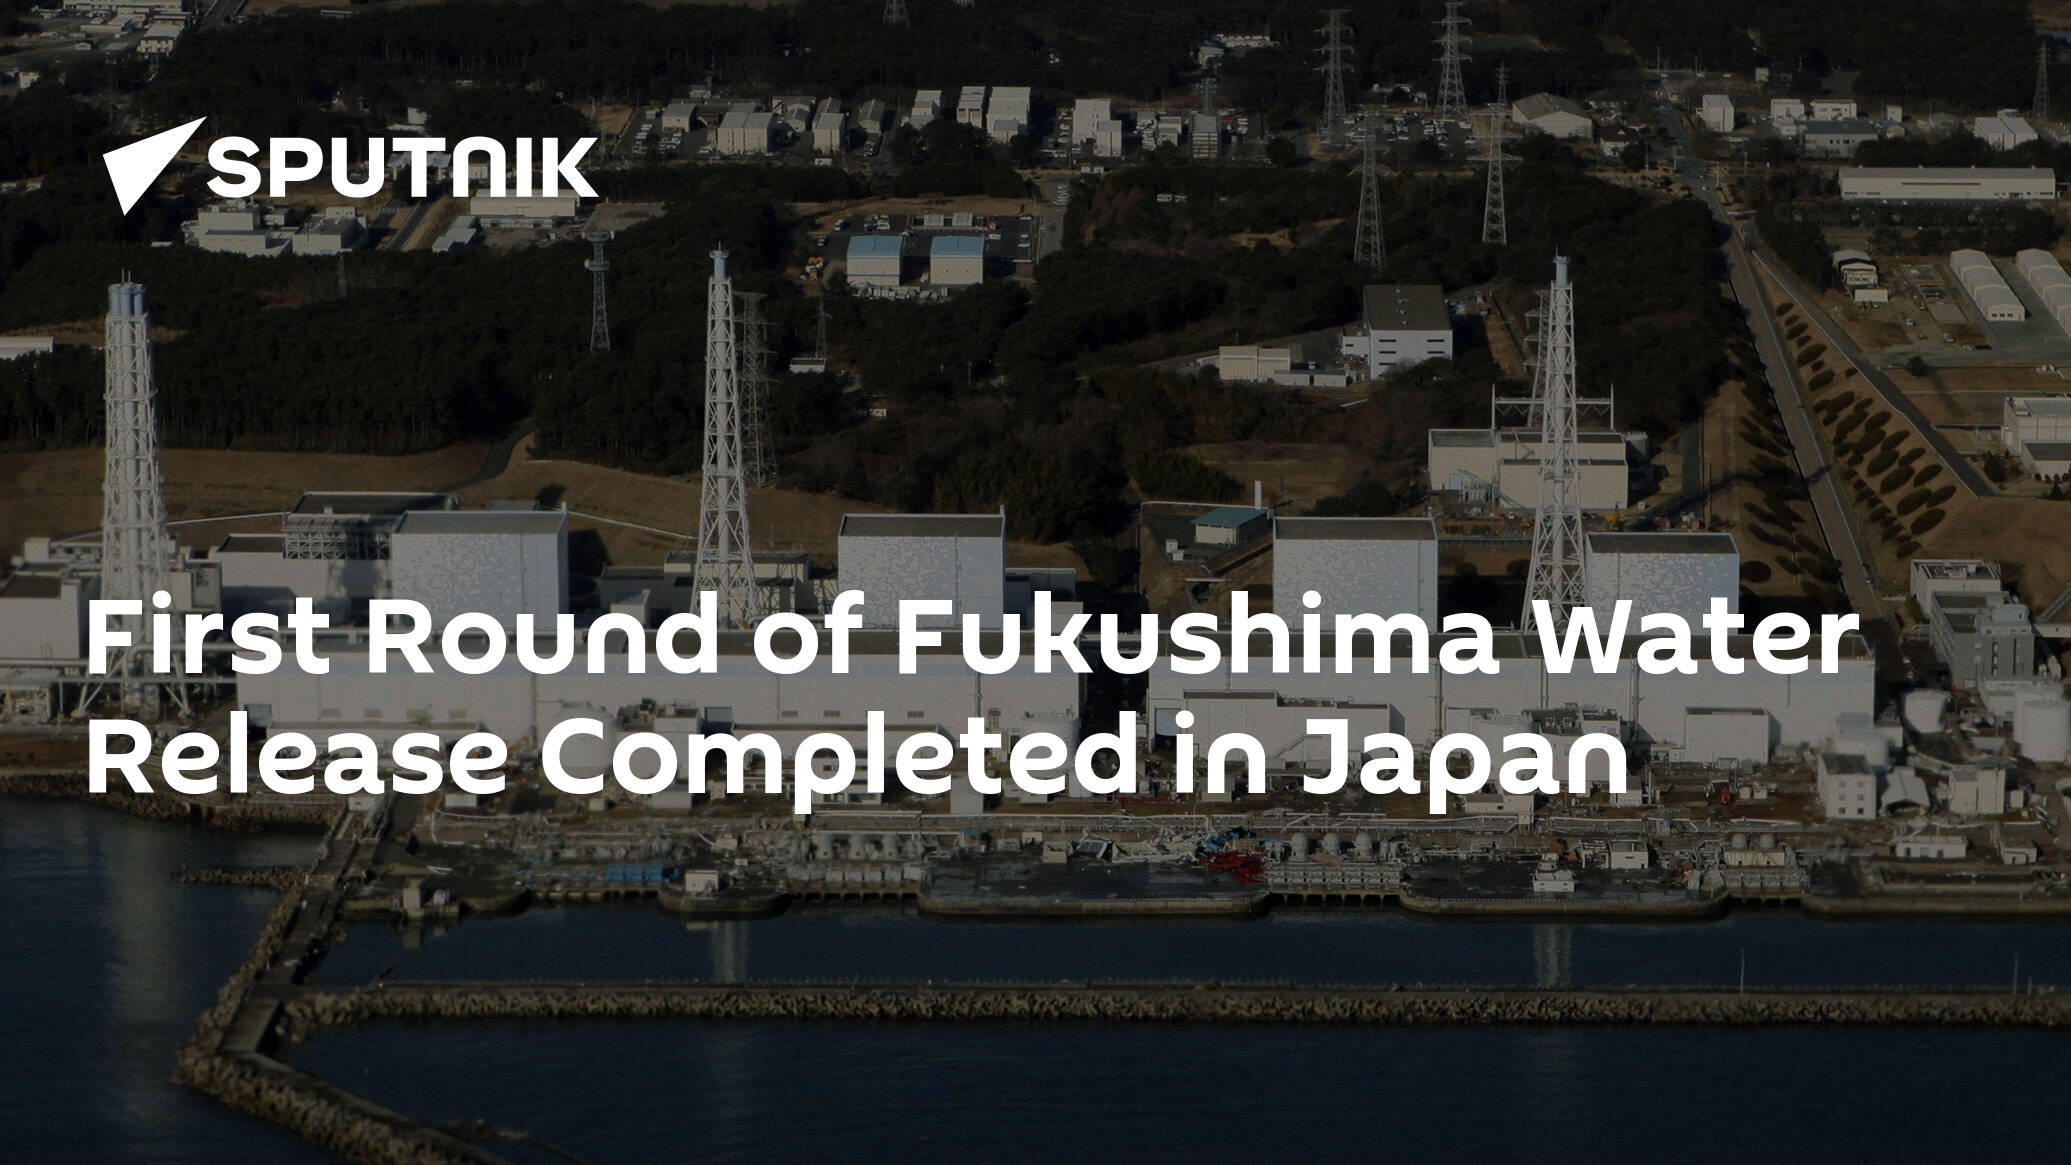 First Round of Fukushima Water Release Completed in Japan